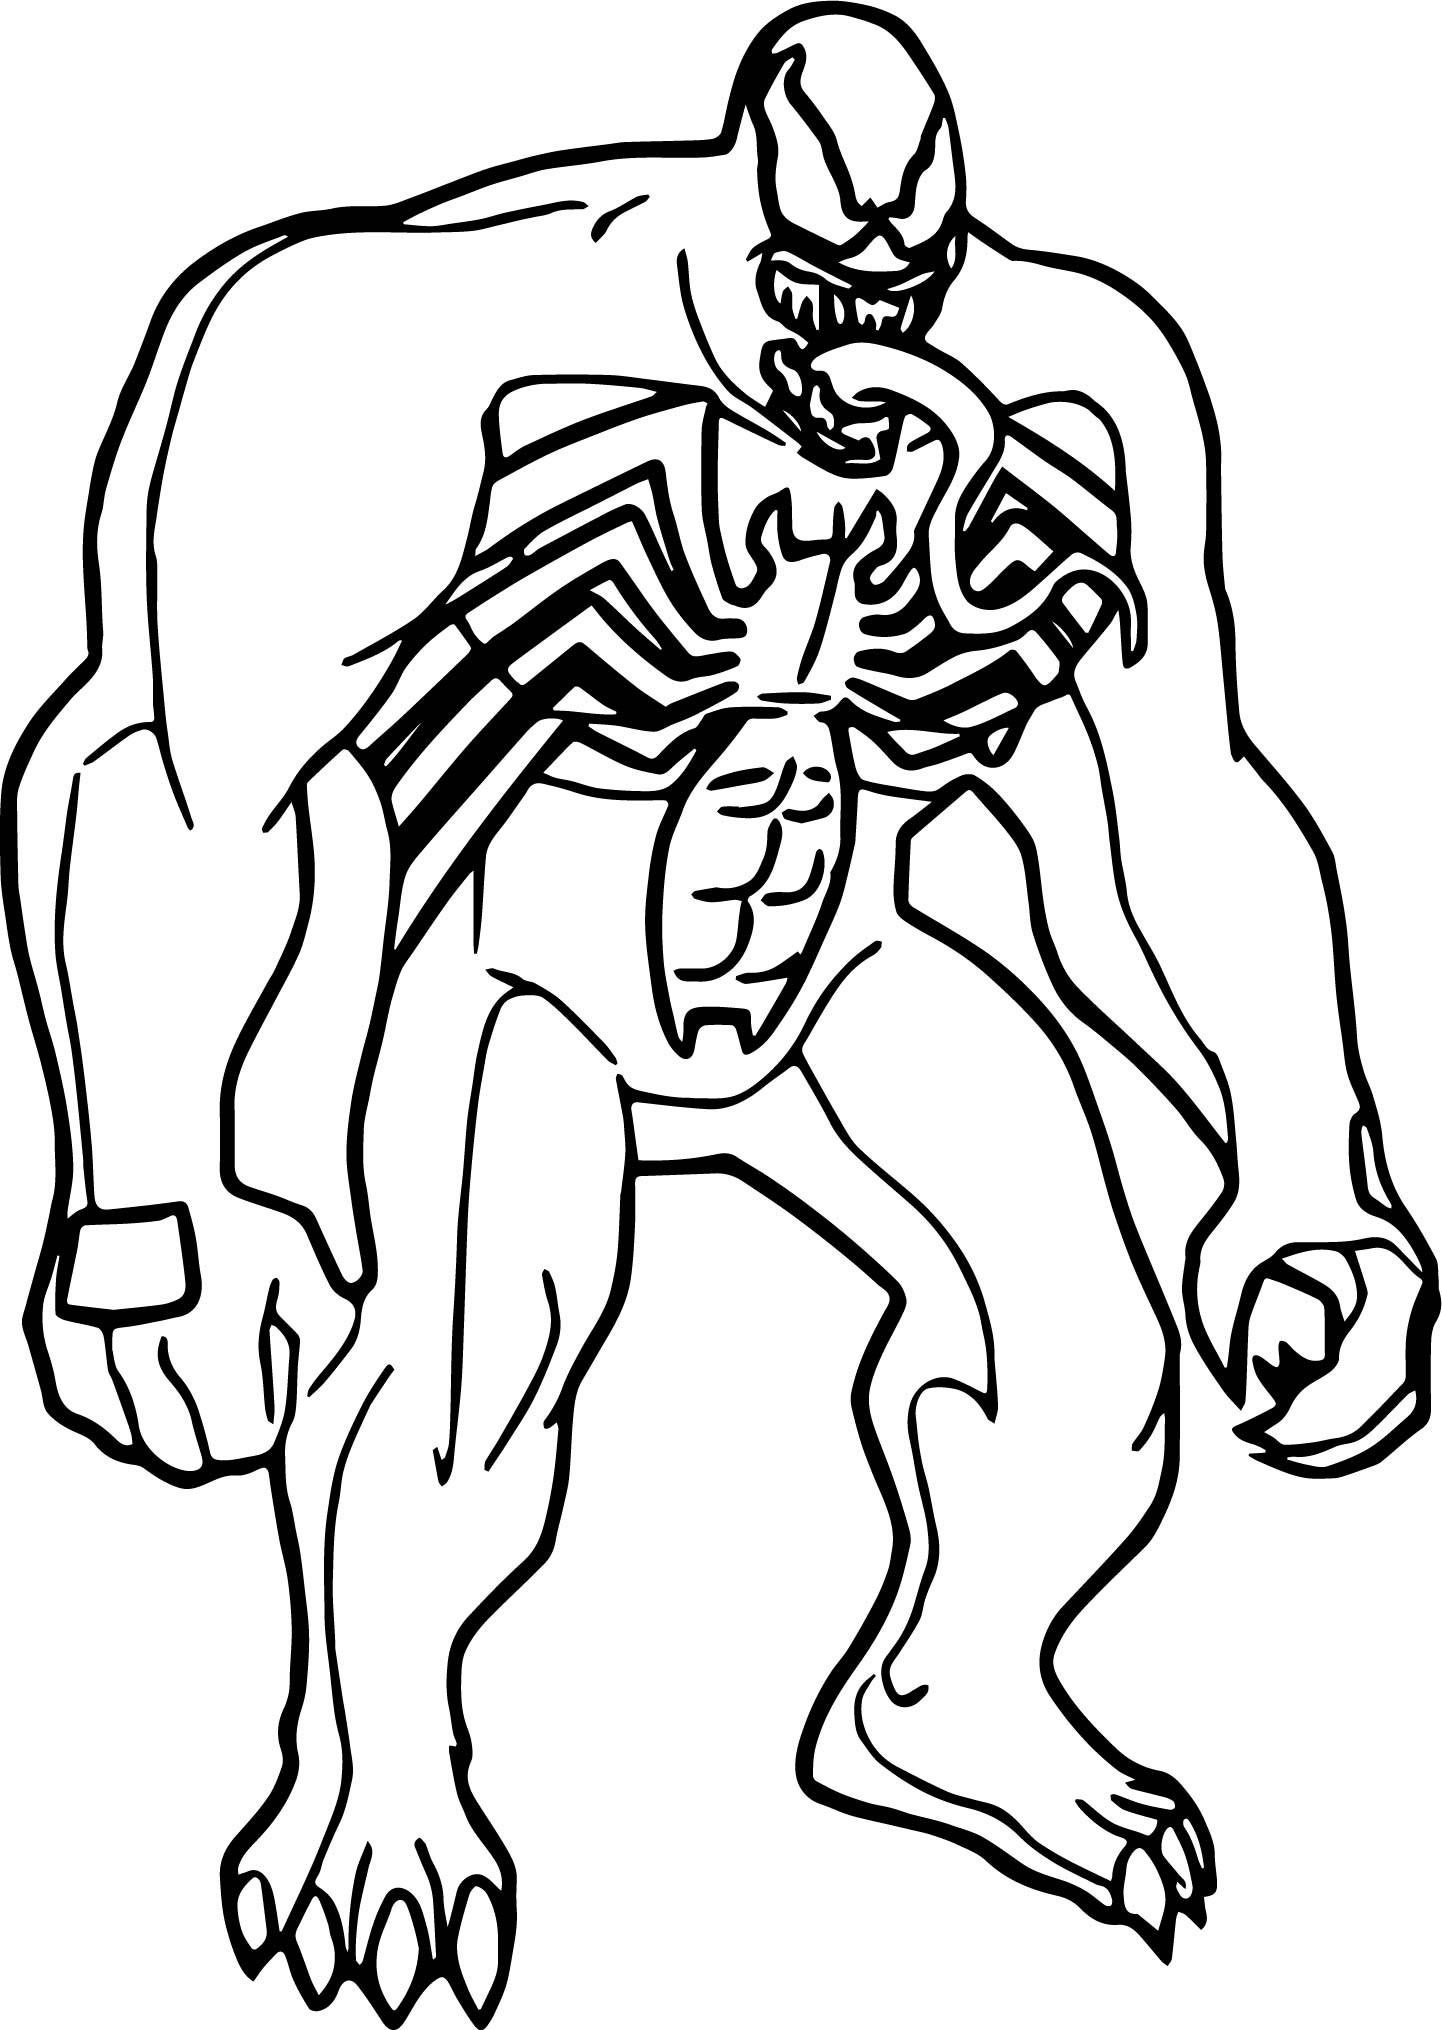 Marvel Printable Coloring Pages
 Marvel Venom Coloring Page